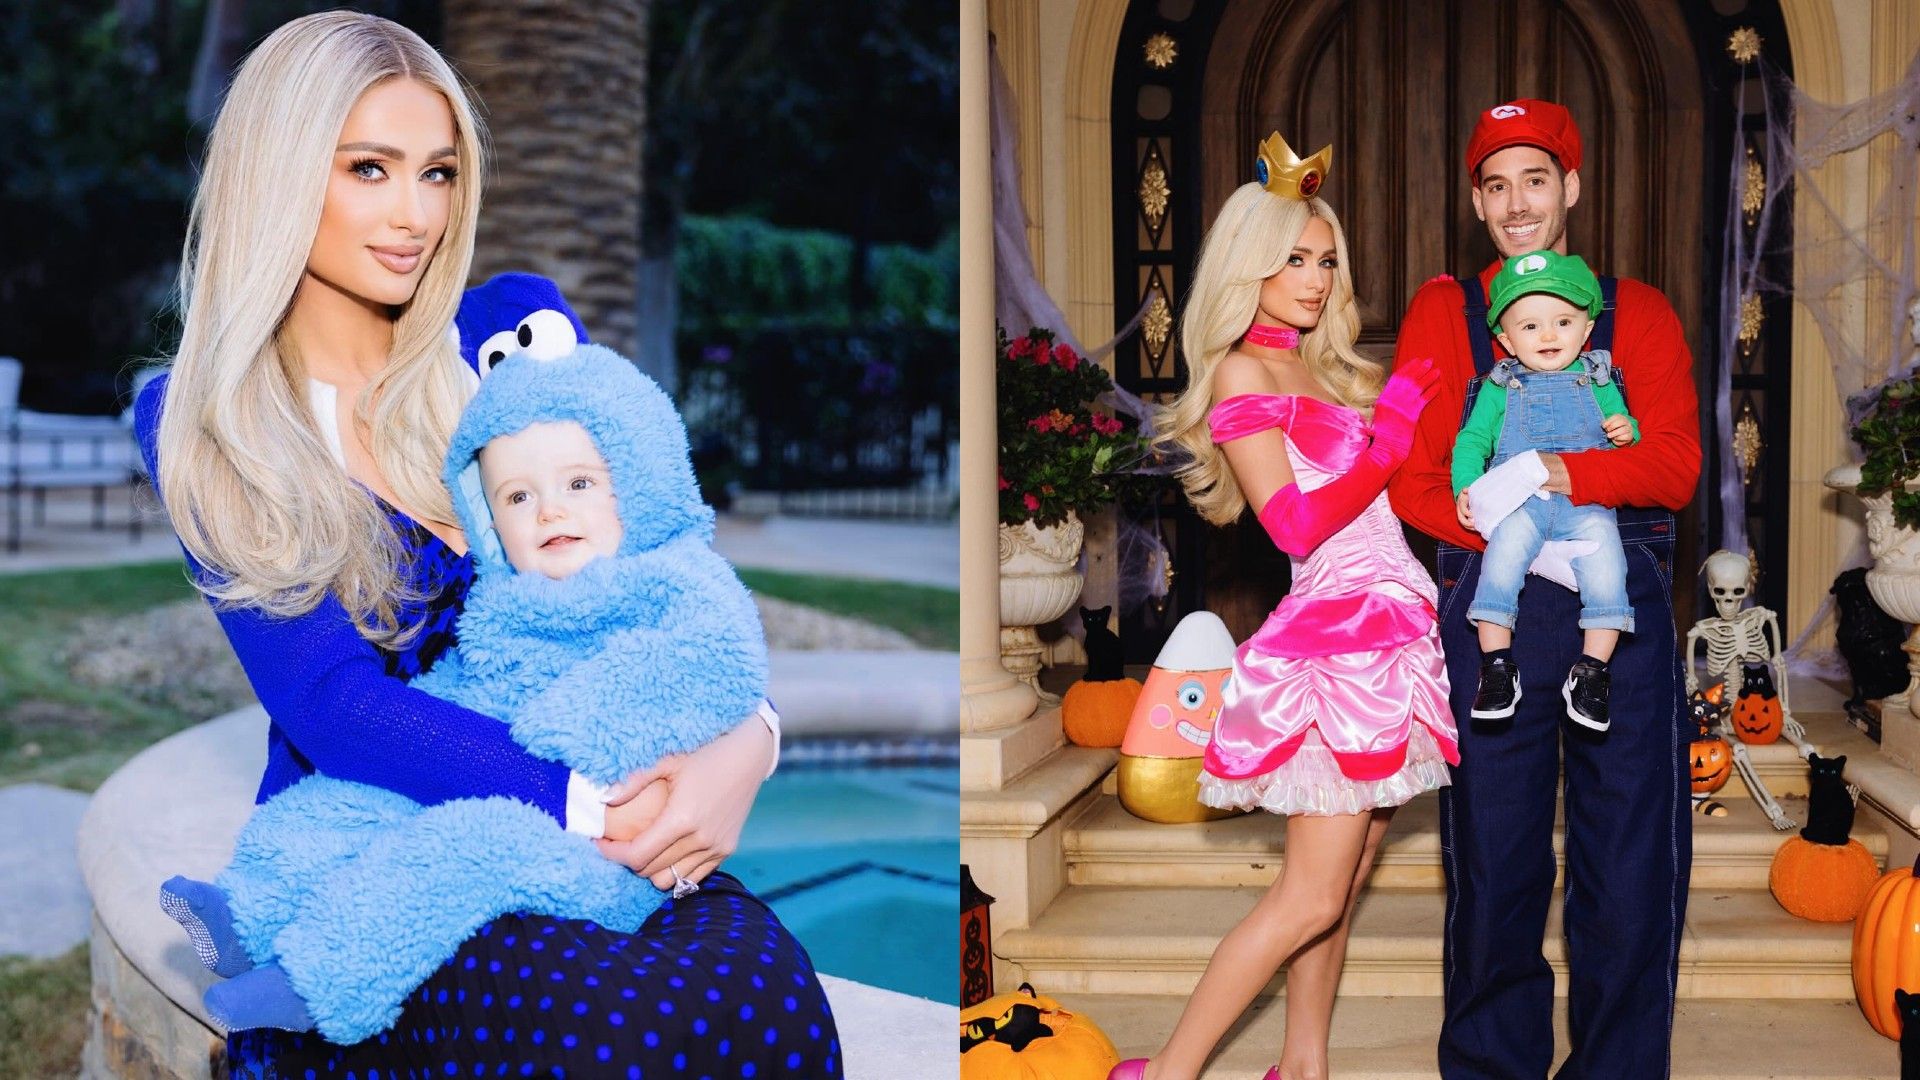 Paris Hilton with her son and husband